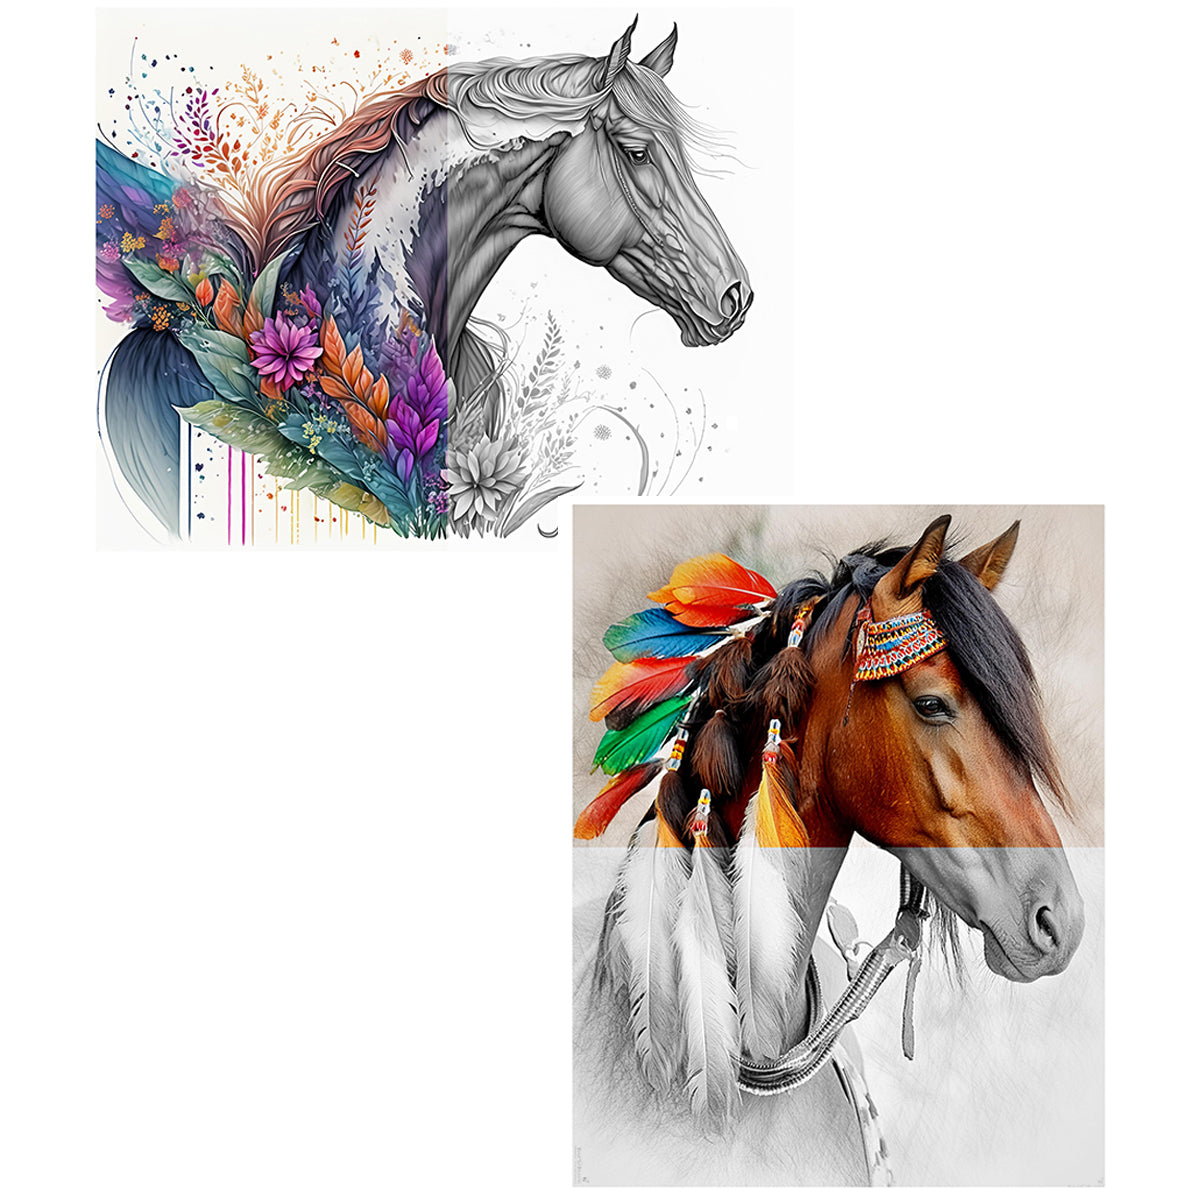 Great2bColorful - 16" x 20" Advanced Grayscale Coloring Sheets, 2 Pack Set - "Wild And Free"